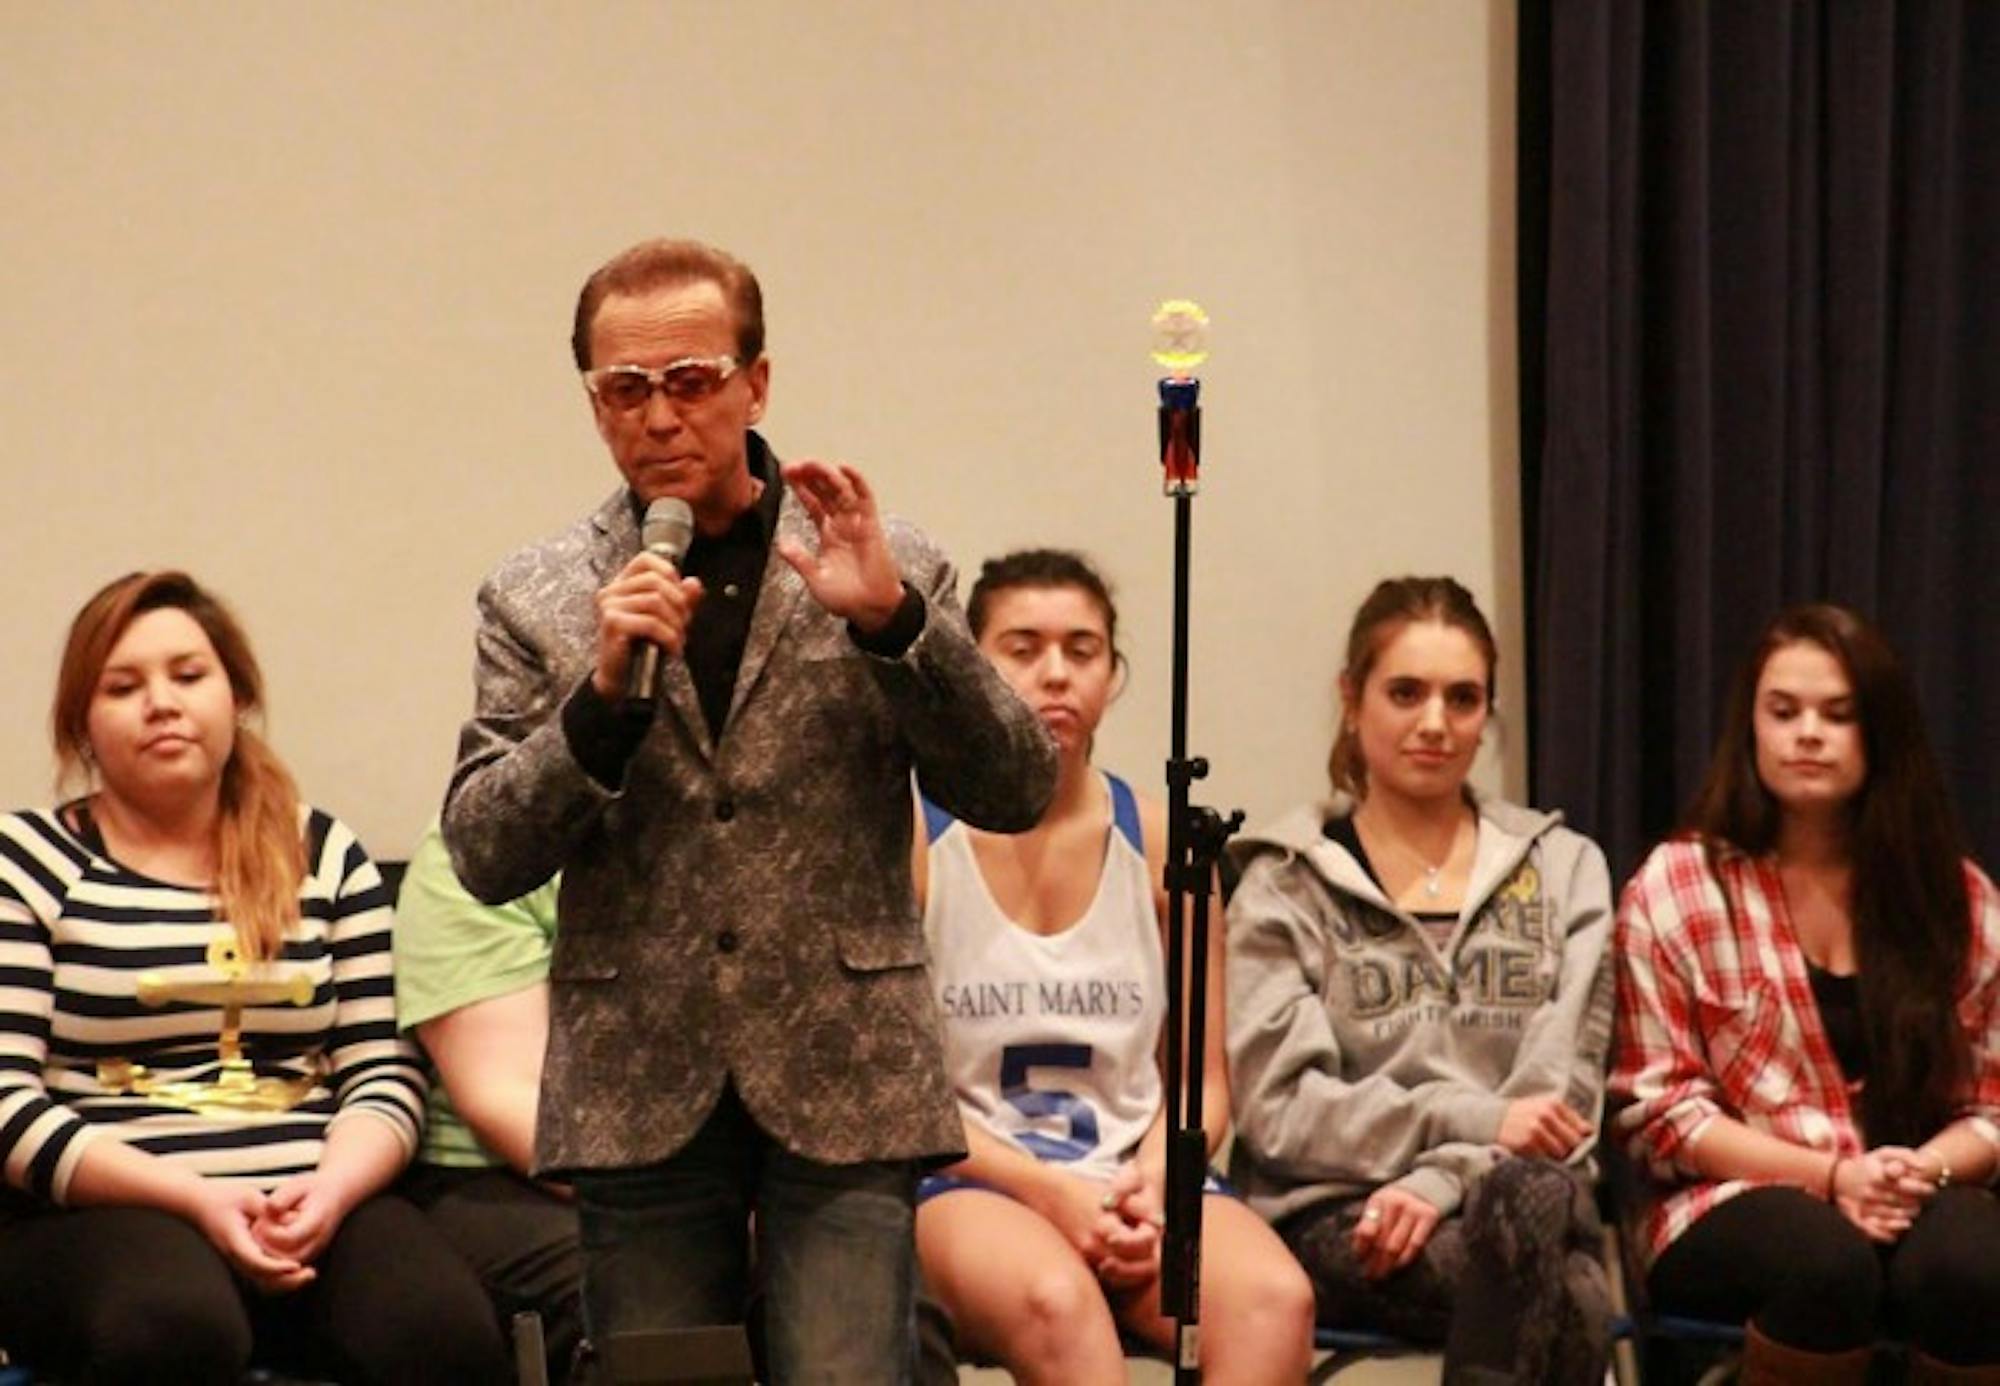 Dr. Jim Wand hypnotizes Saint Mary’s students. Wand has also worked with celebrities like Jay Leno and Conan O’ Brian.